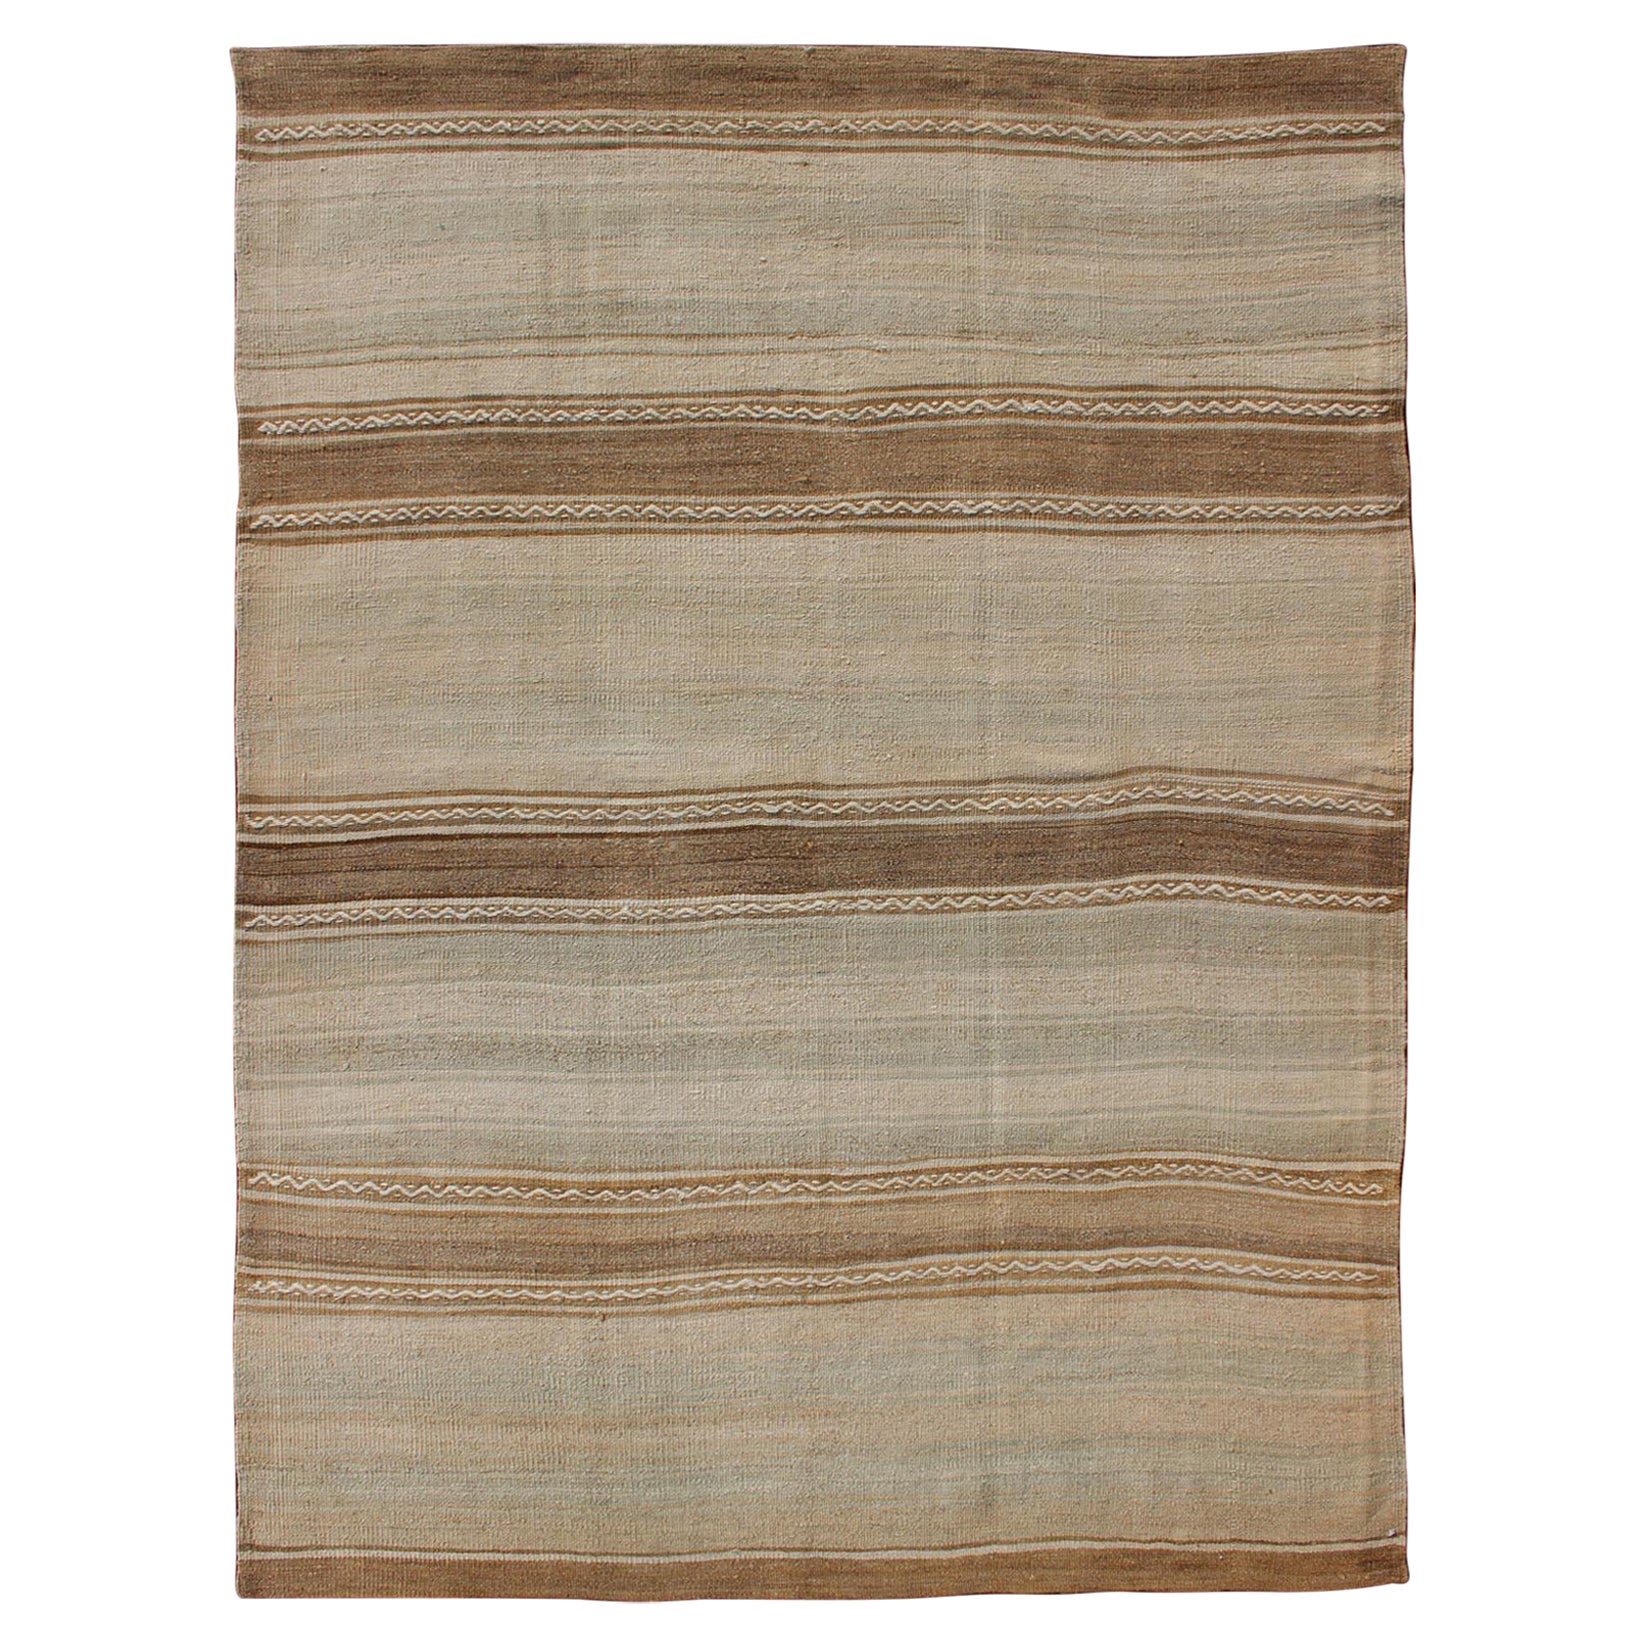 Turkish Vintage Kilim Rug with in Taupe, Brown, Faint Gray Blue, and Earth Tones